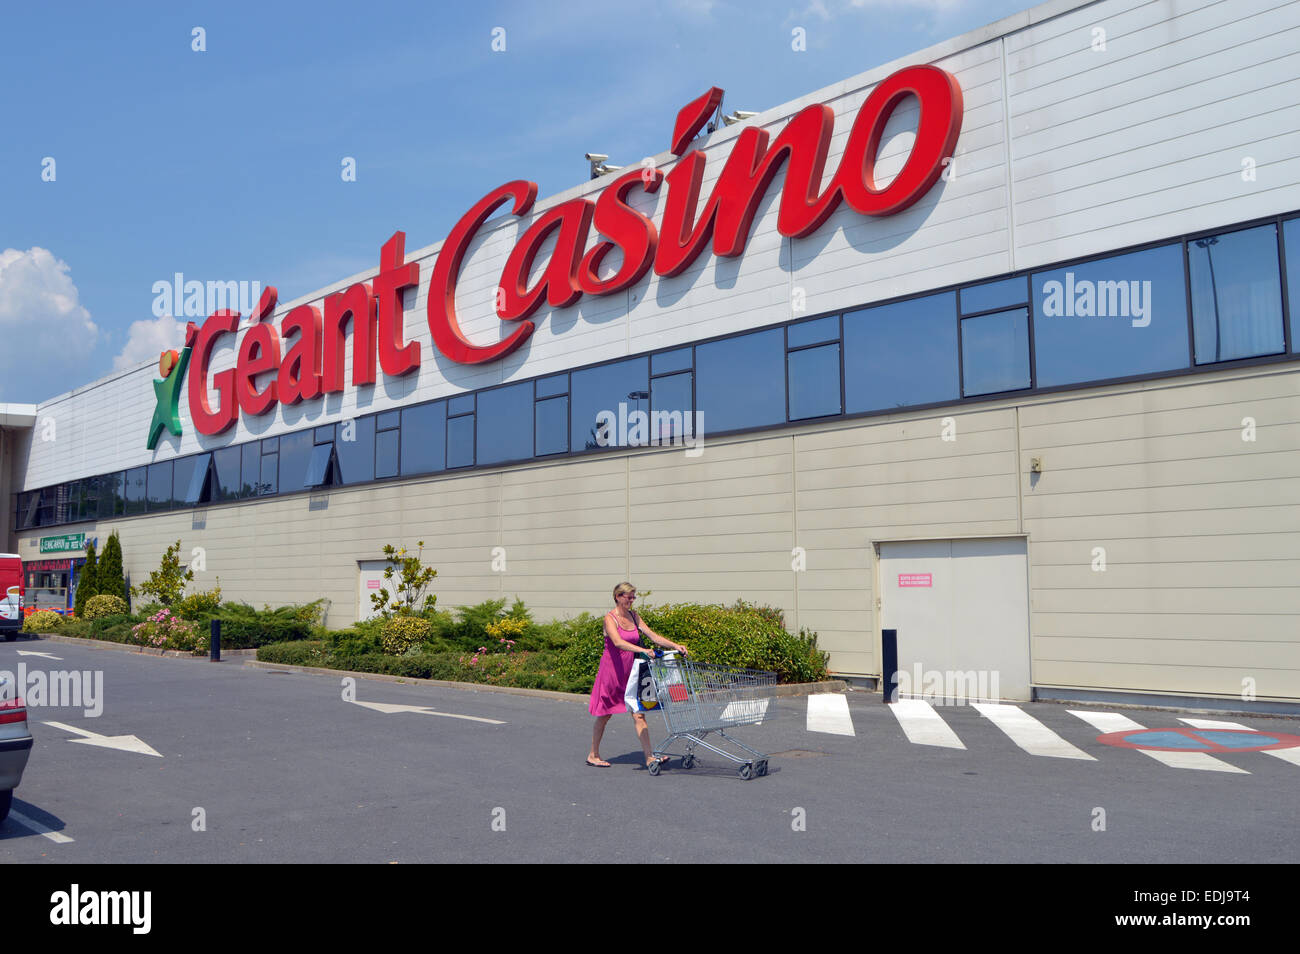 SEDAN, FRANCE - JULY 2013: Facade of a Géant Casino hypermarket, part of French retailing giant Groupe Stock Photo